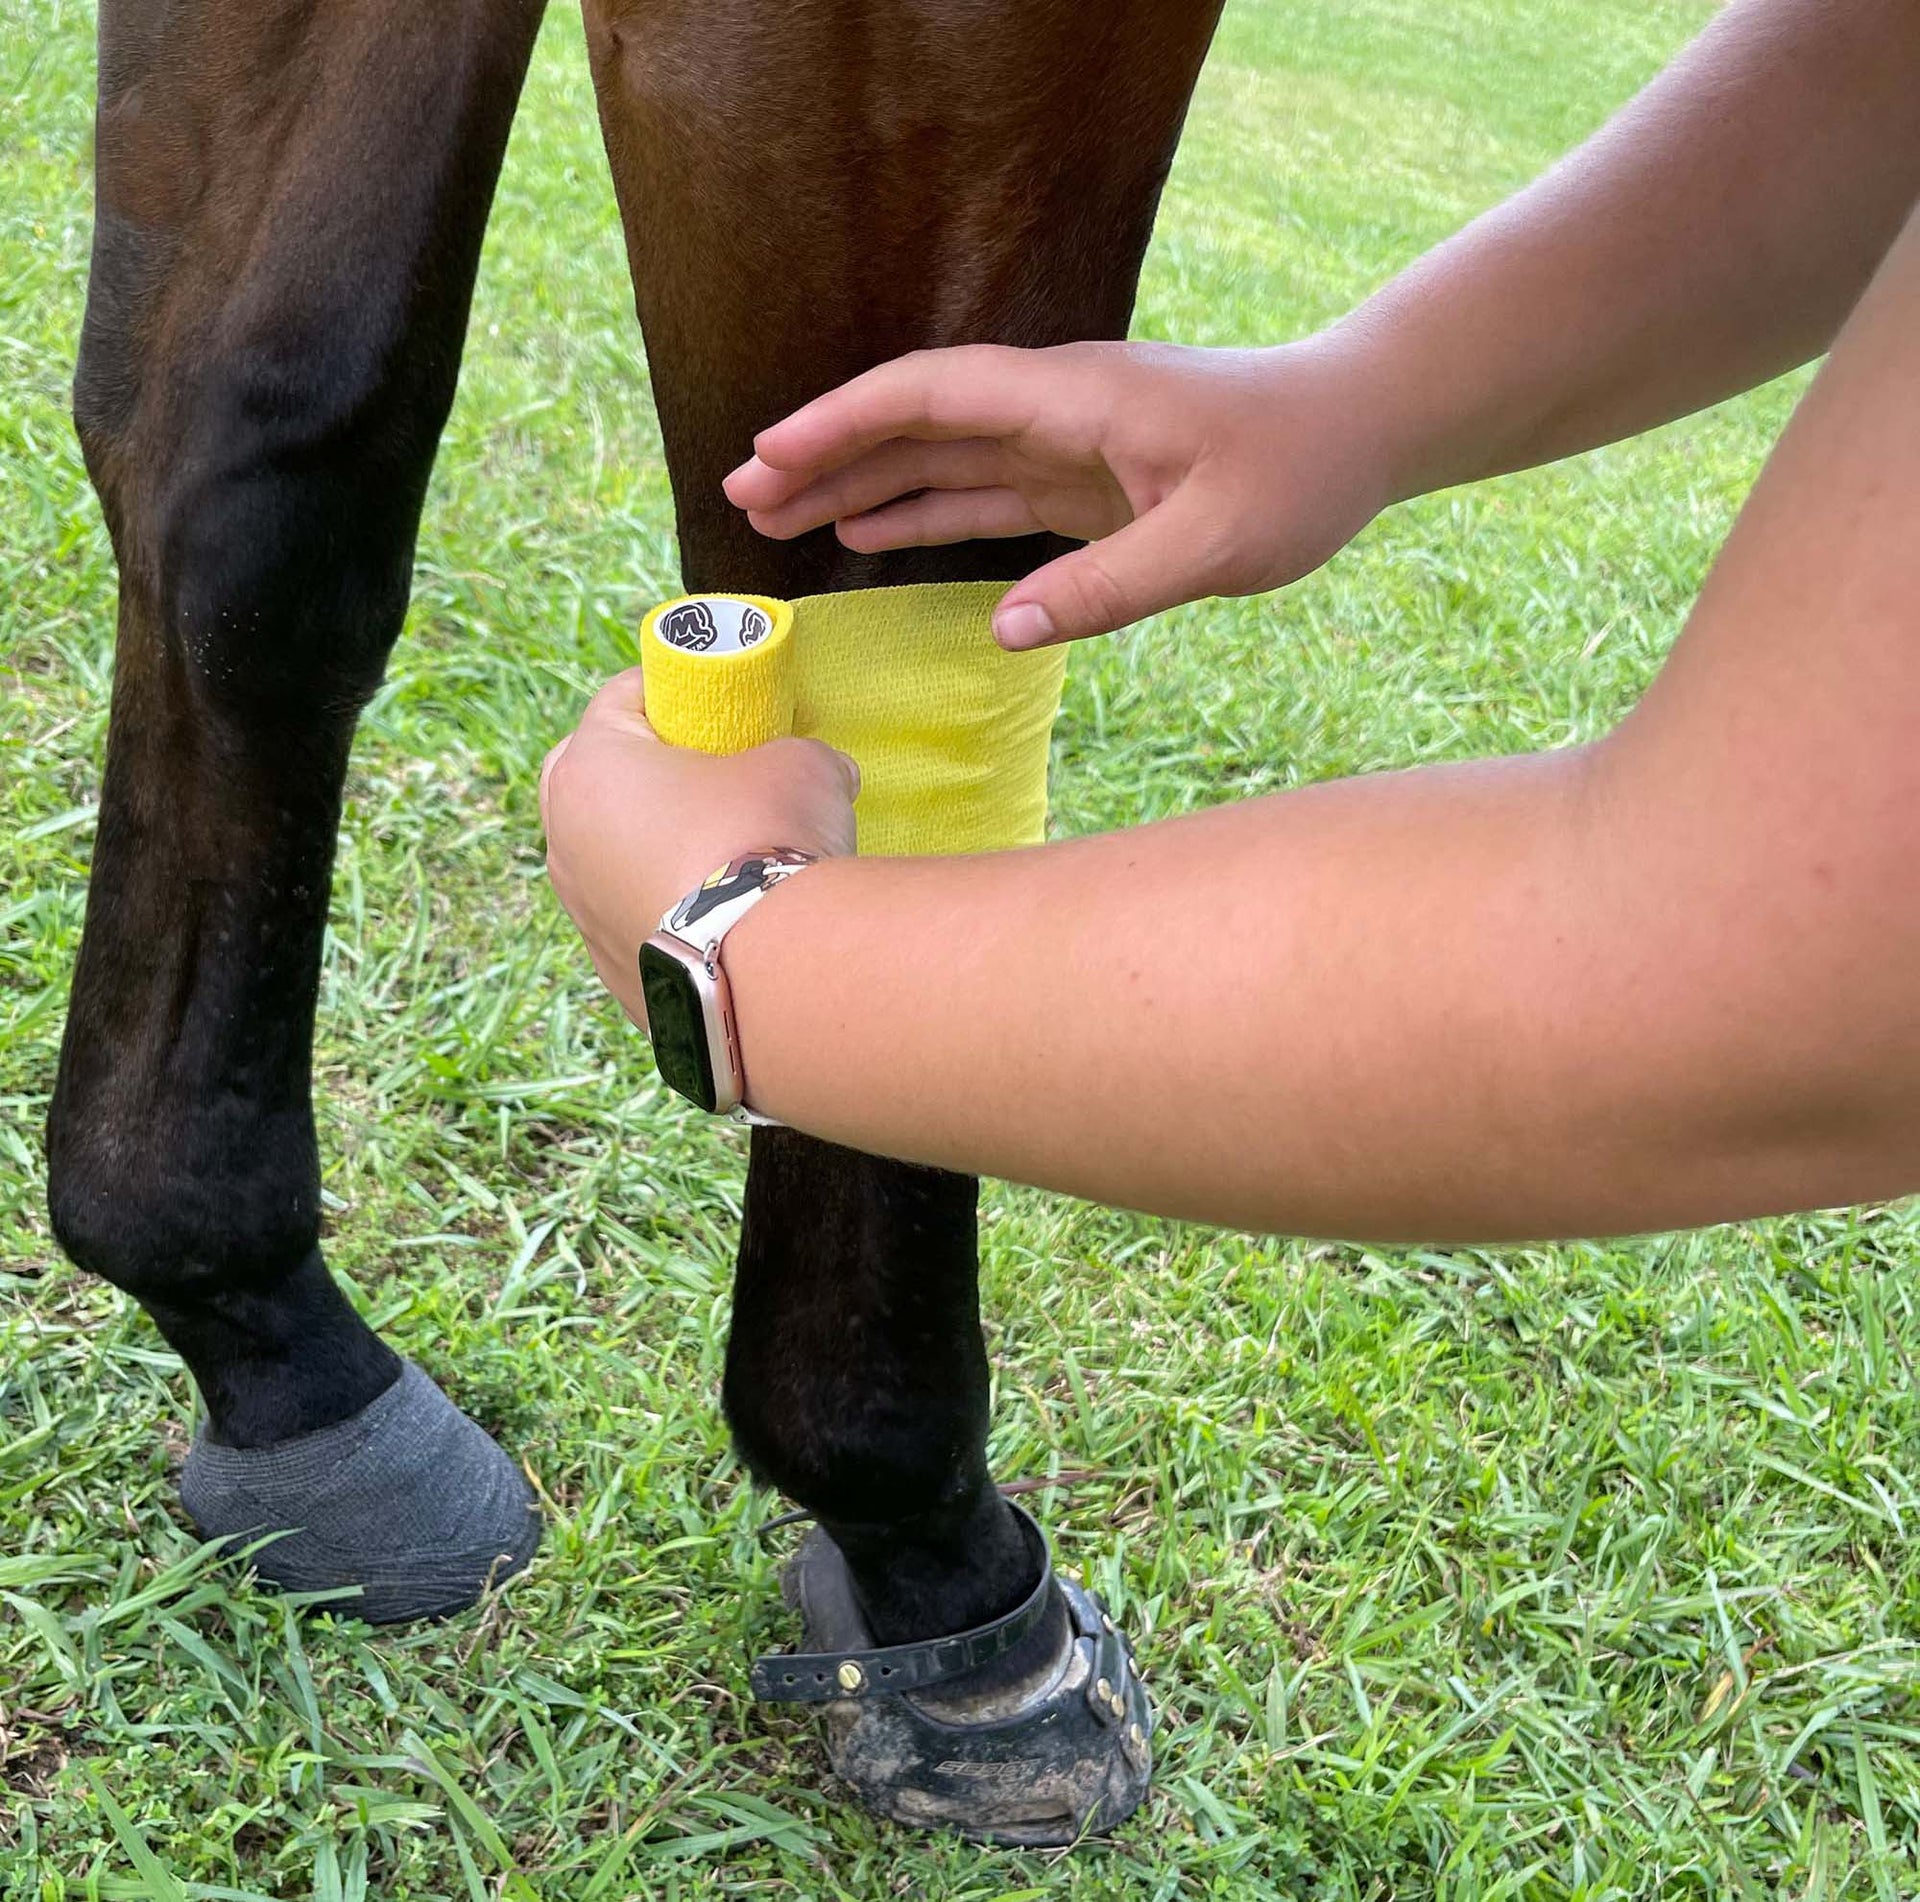 Wrapping a horse's leg with WildCow vet wrap